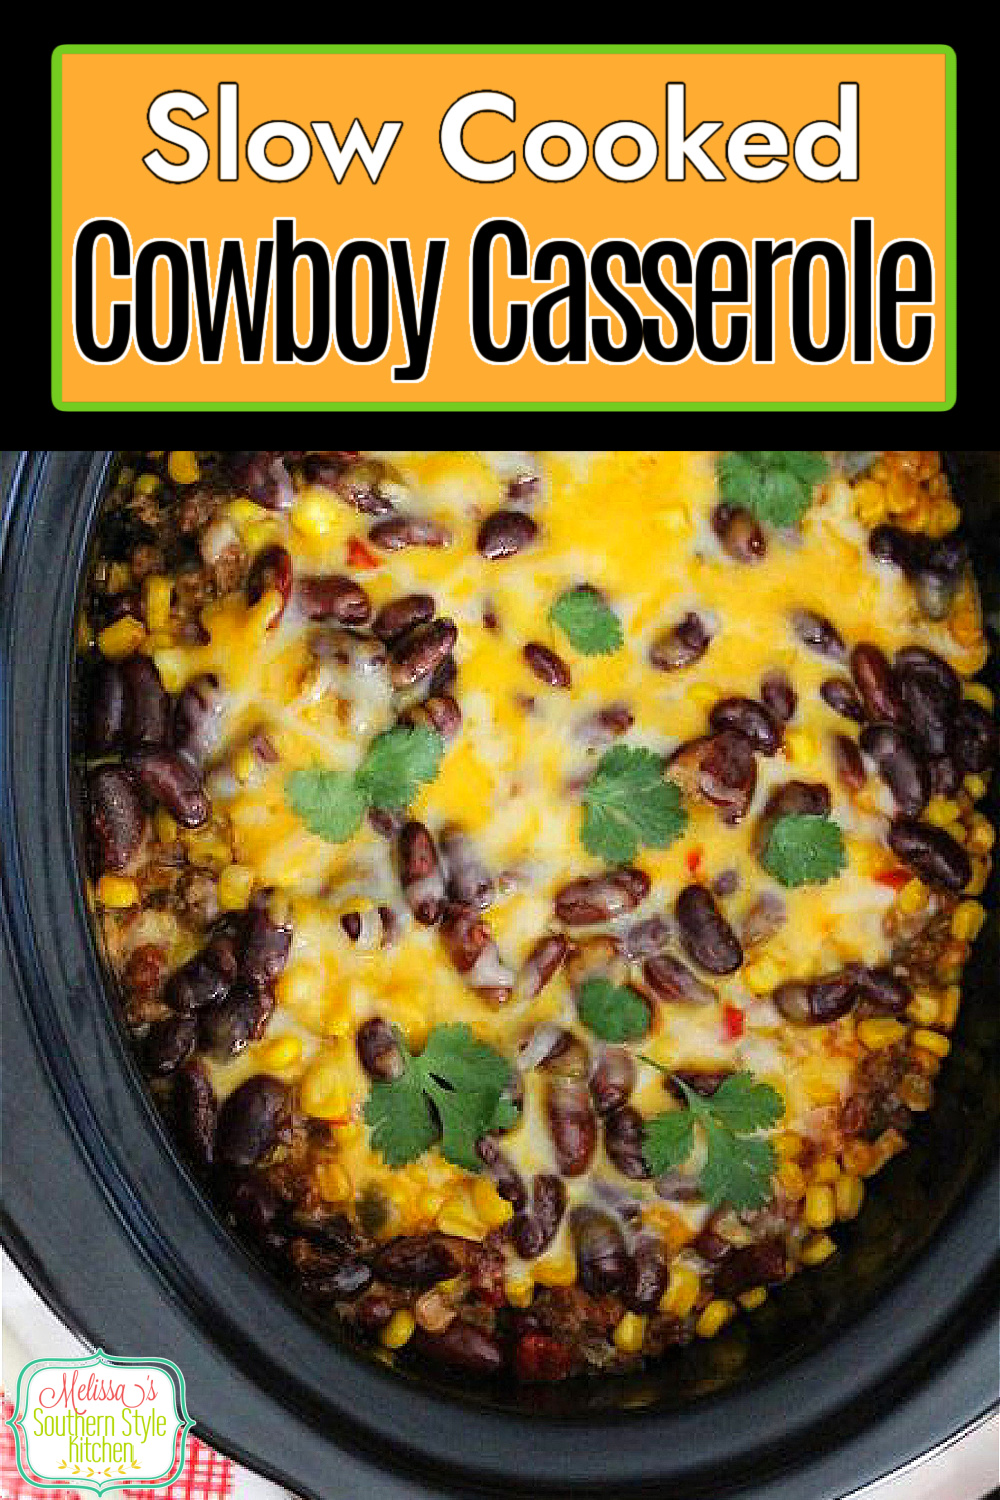 This Slow Cooked Kickin' Cowboy Casserole makes a mouthwatering one pot meal guaranteed to satisfy at the end of a hectic day #slowcookercowboycasserole #casseroles #casserolerecipes #easygroundbeefrecipes #slowcookerrecipes #crockpotcowboycasserole #easycasseroles via @melissasssk